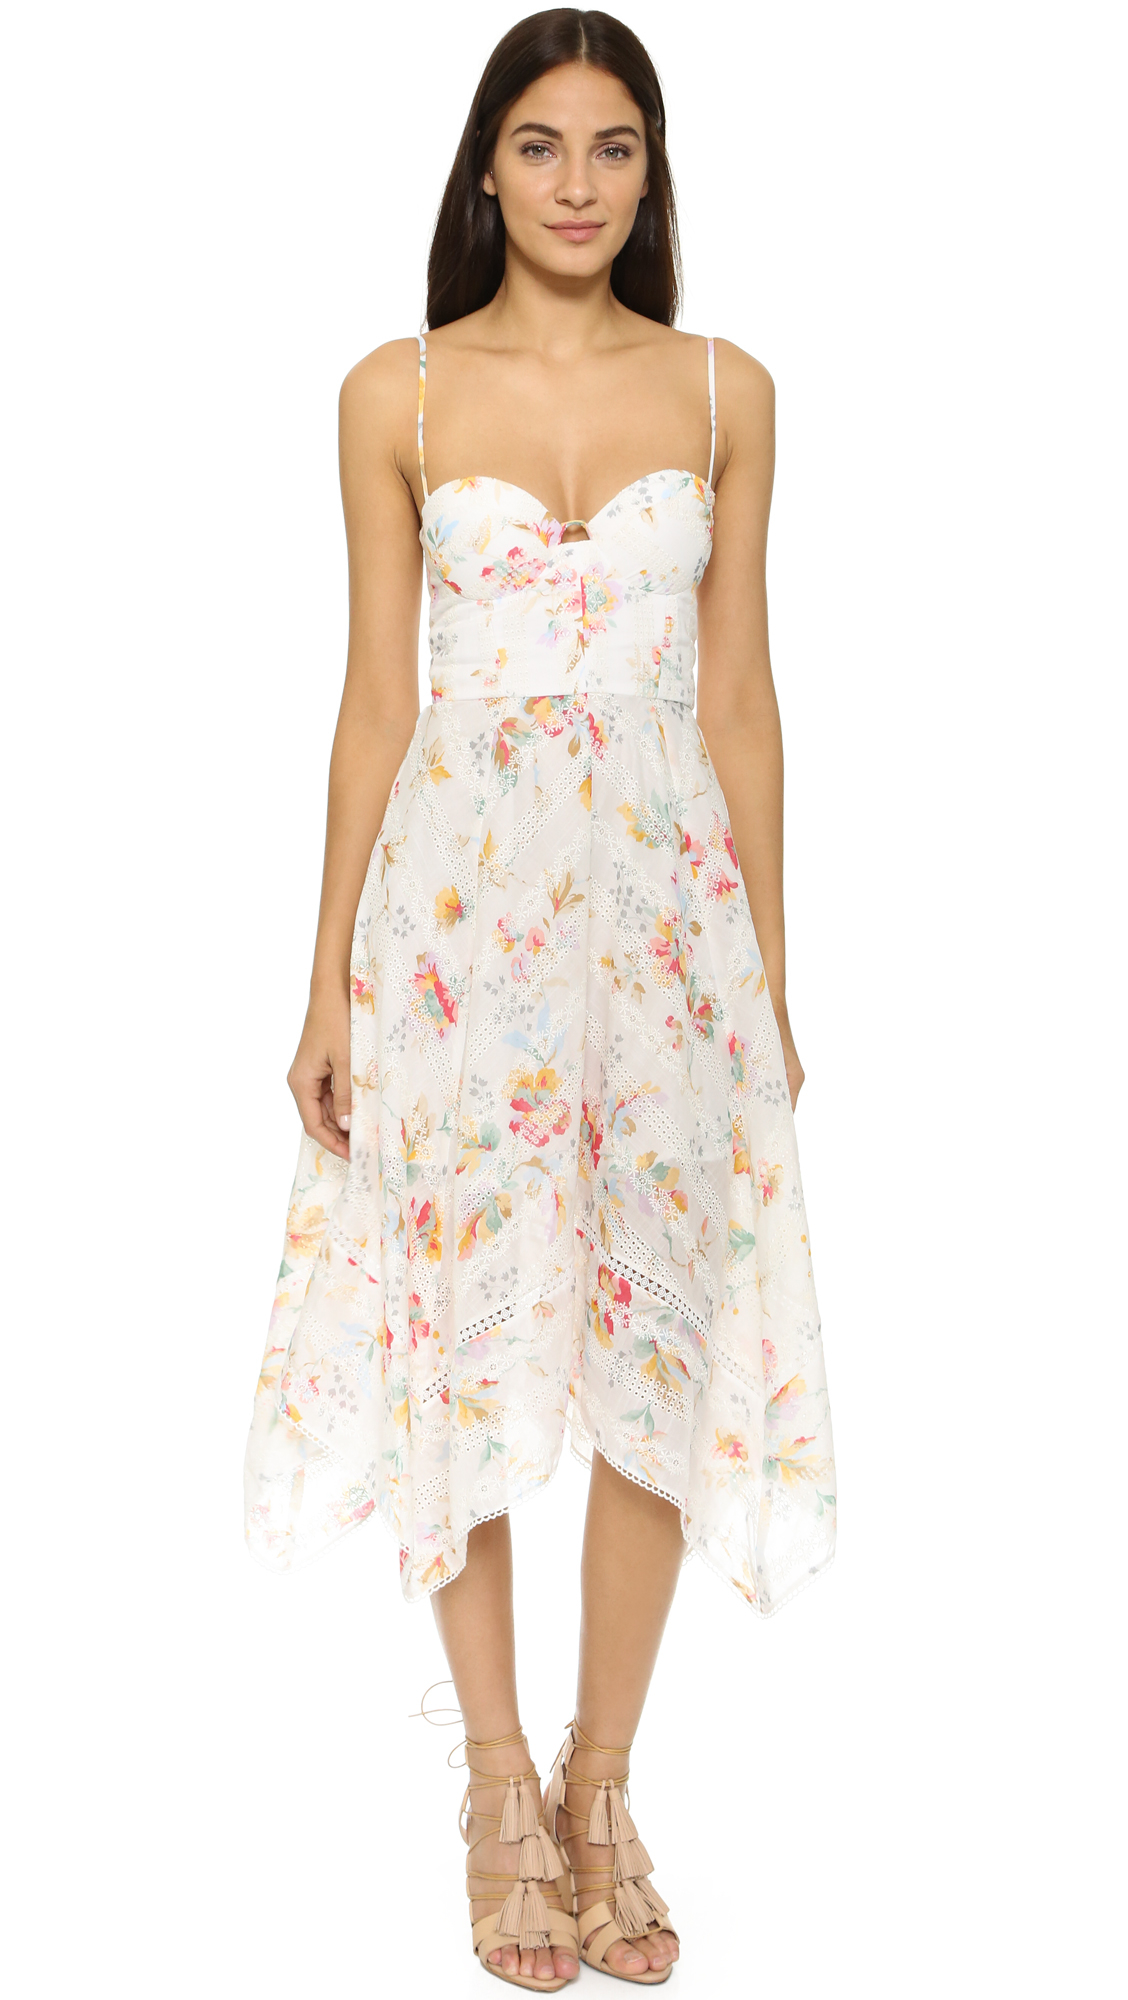 https://cdna.lystit.com/photos/7829-2015/12/30/zimmermann-floral-embroidery-belle-bustier-dress-floral-embroidery-product-3-237769347-normal.jpeg